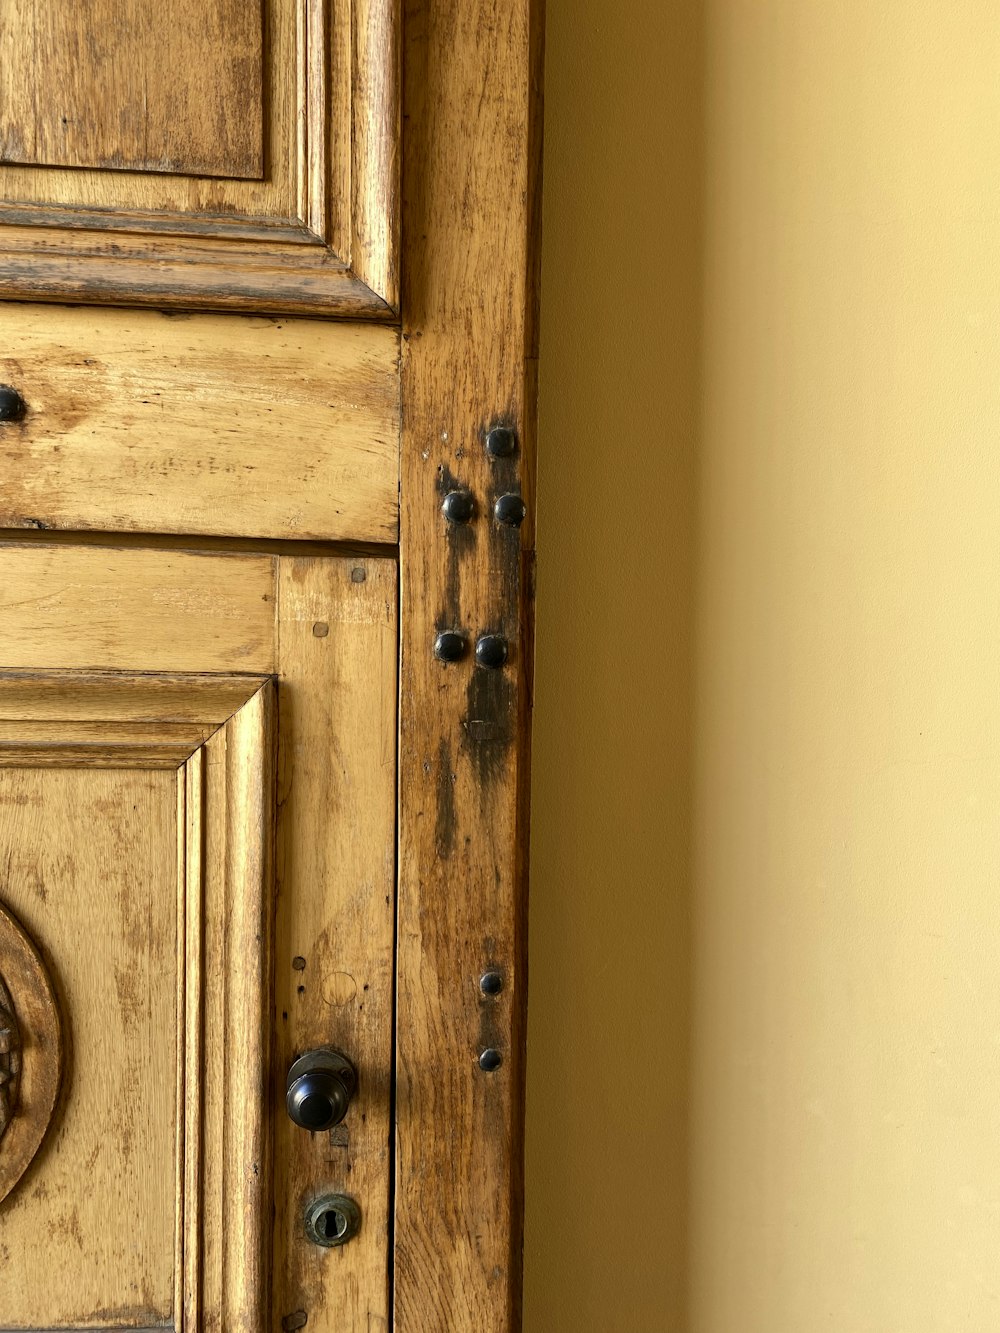 a close up of a wooden door with knobs